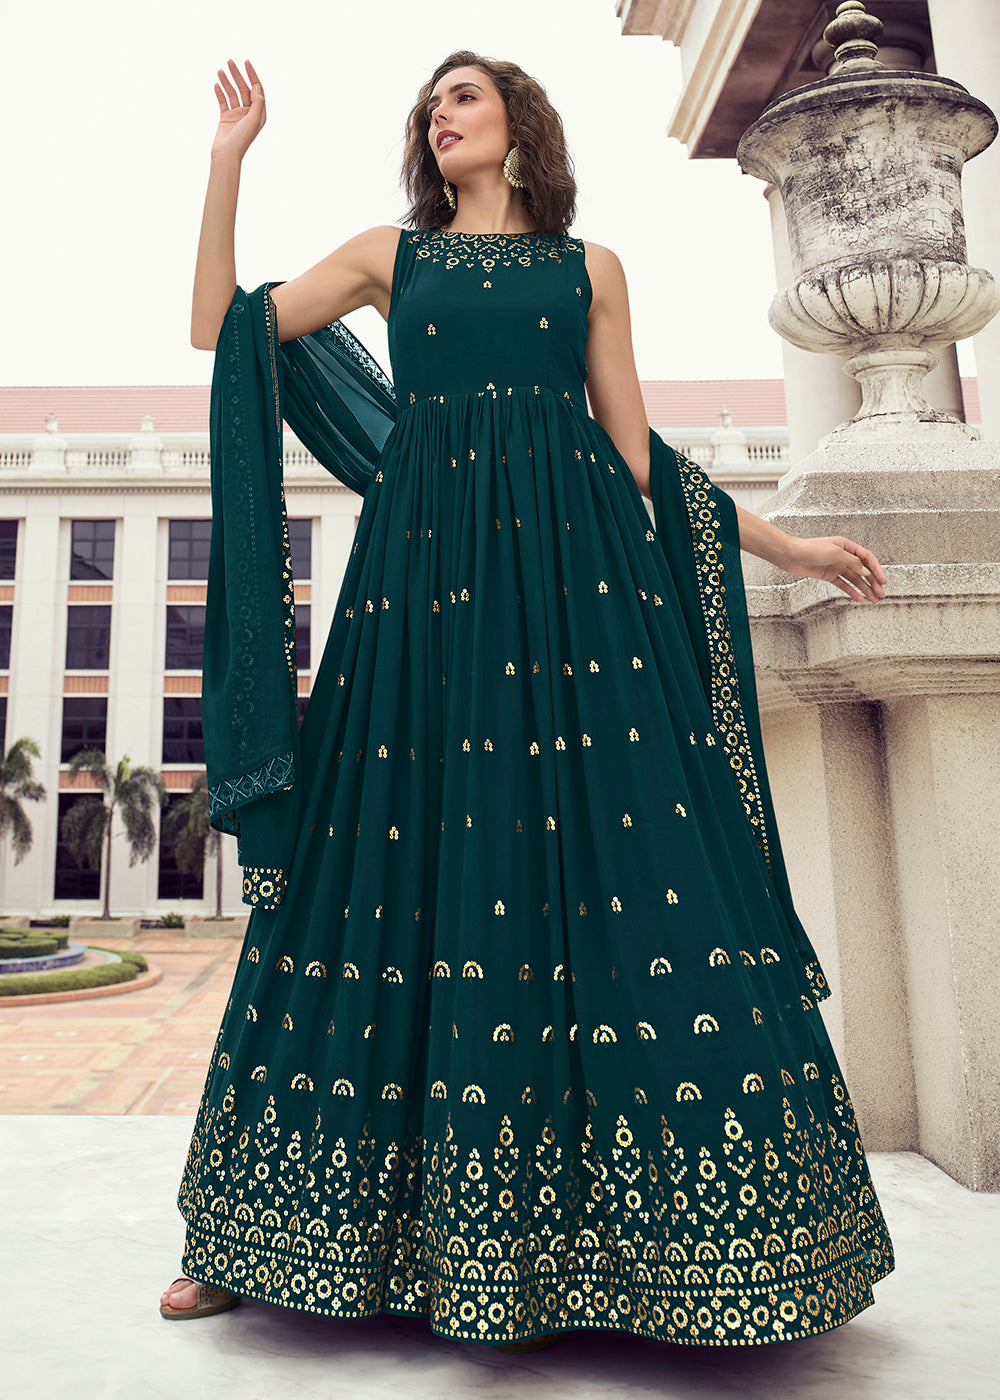 Buy Now Rama Teal Georgette Thread & Sequins Wedding Party Gown Online in USA, UK, Australia, New Zealand, Canada & Worldwide at Empress Clothing. 